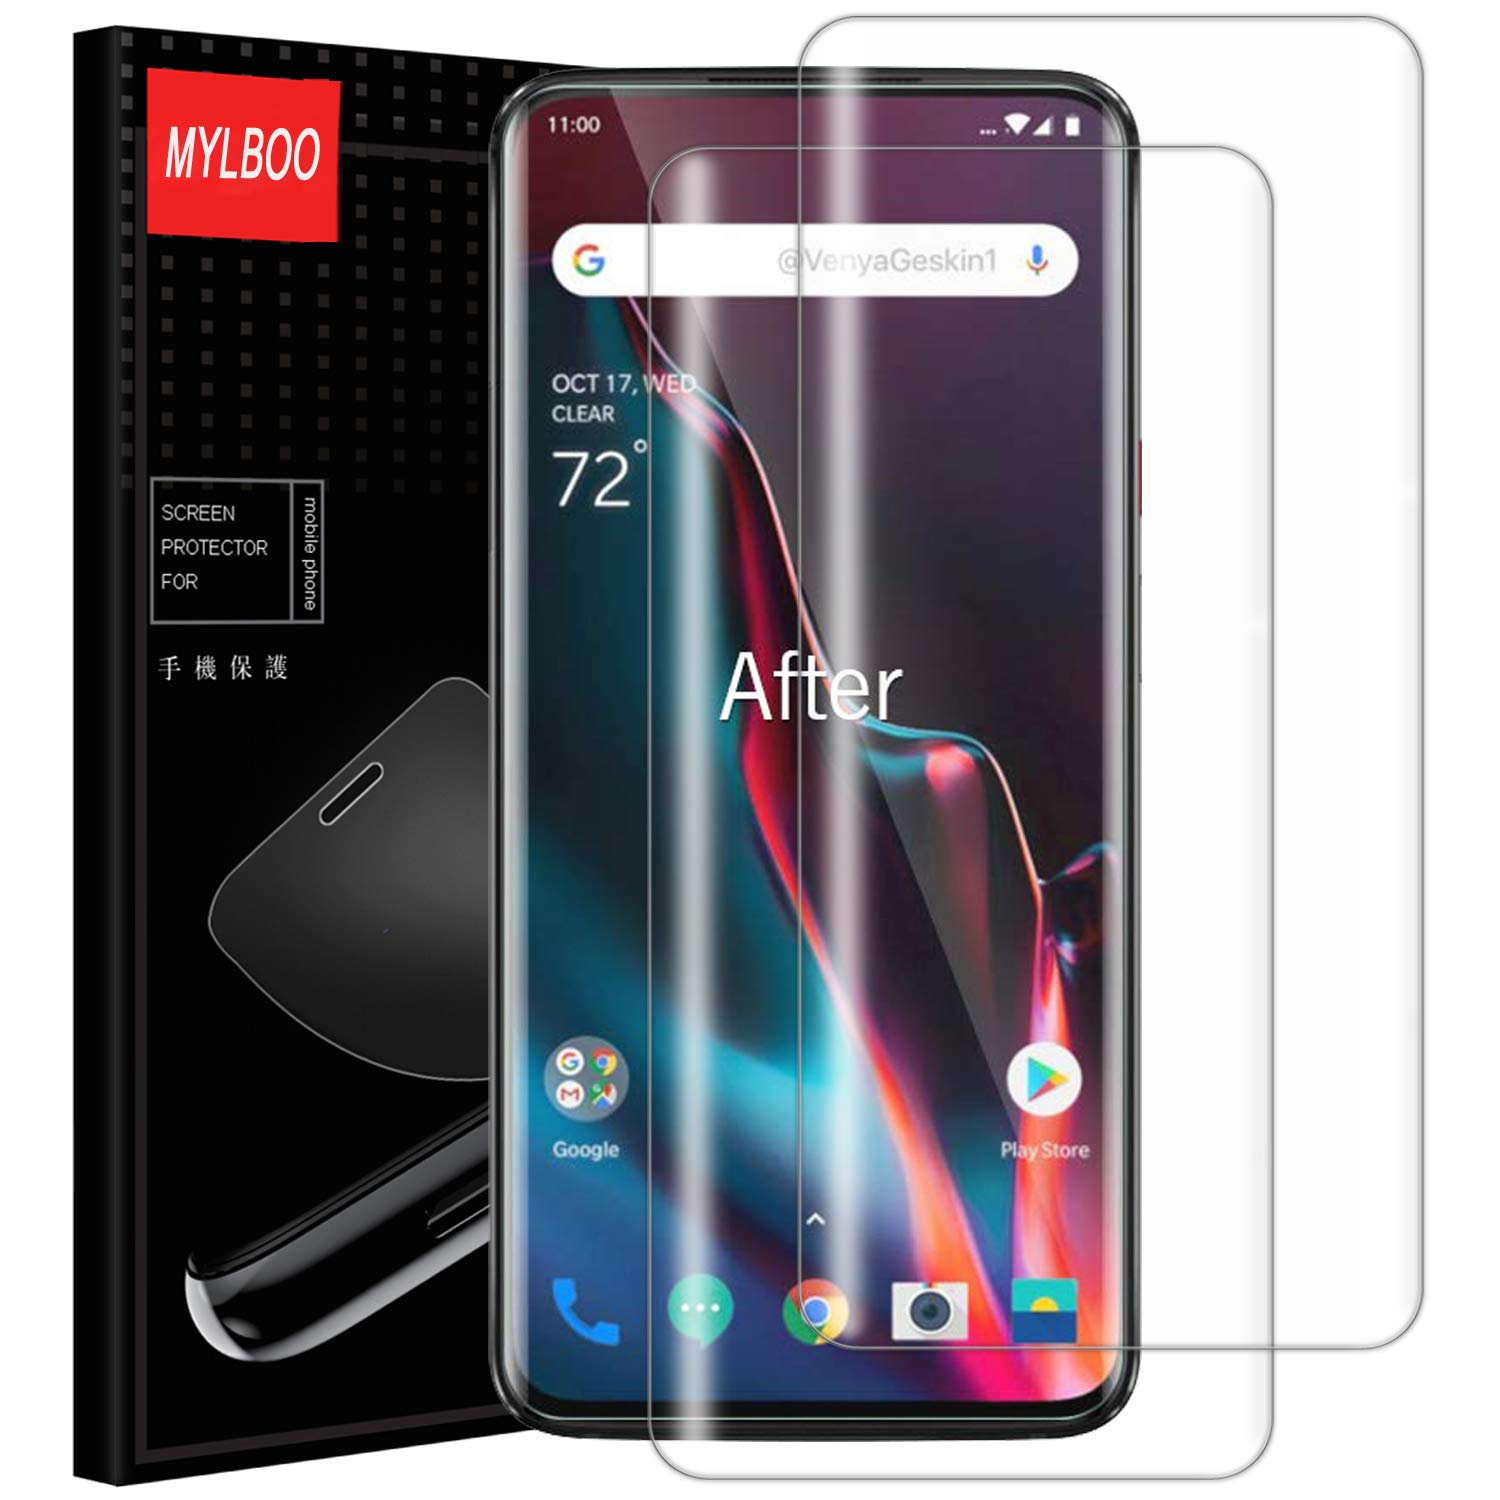 Mylboo Screen Protector for Oneplus 7 Pro